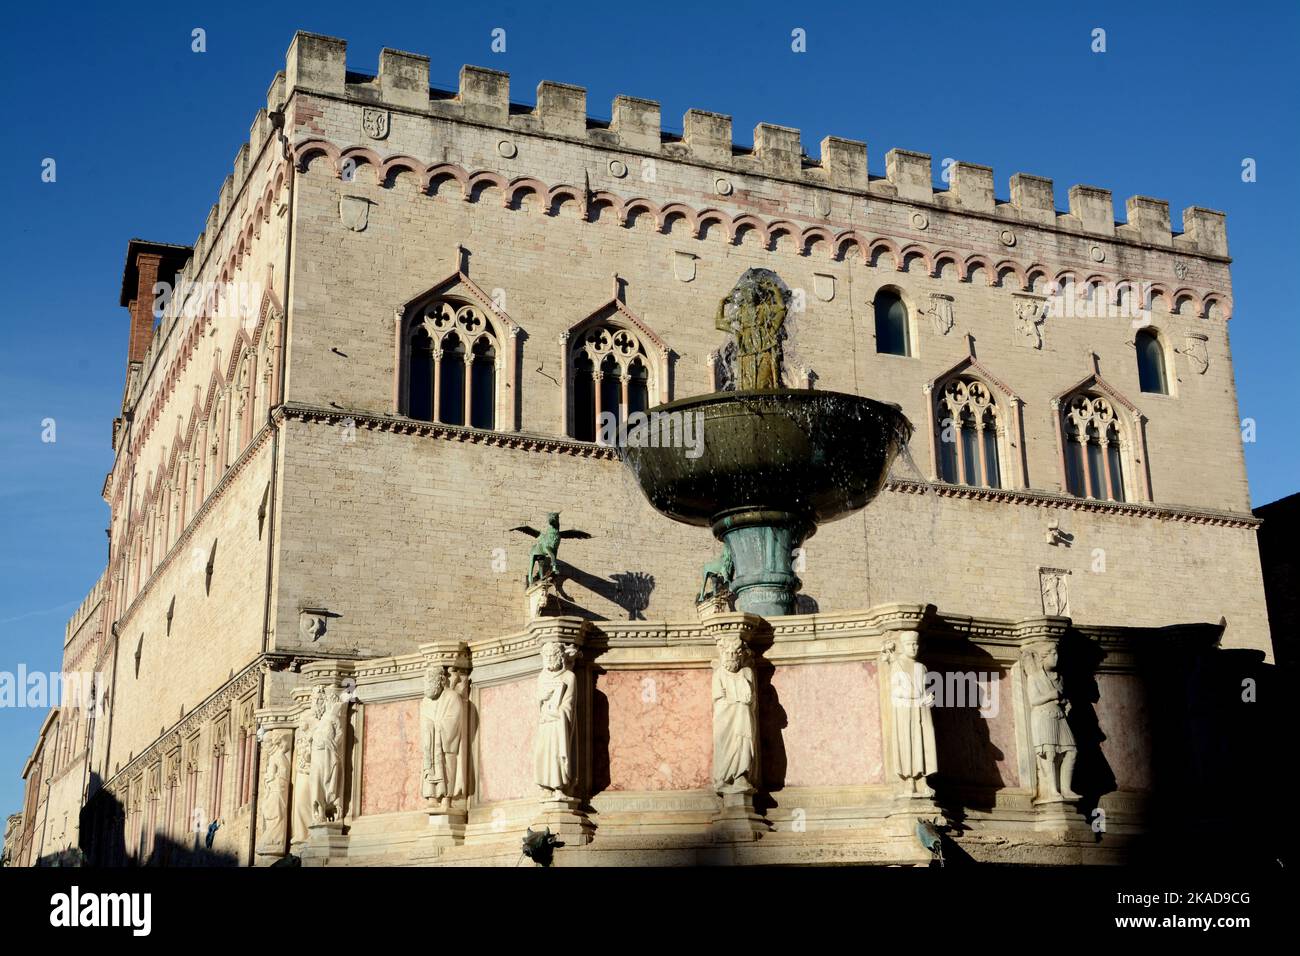 The Fontana Maggiore is located in the center of Piazza IV Novembre in the center of Perugia. Work of the 13th century second half of Giovanni Pisano Stock Photo